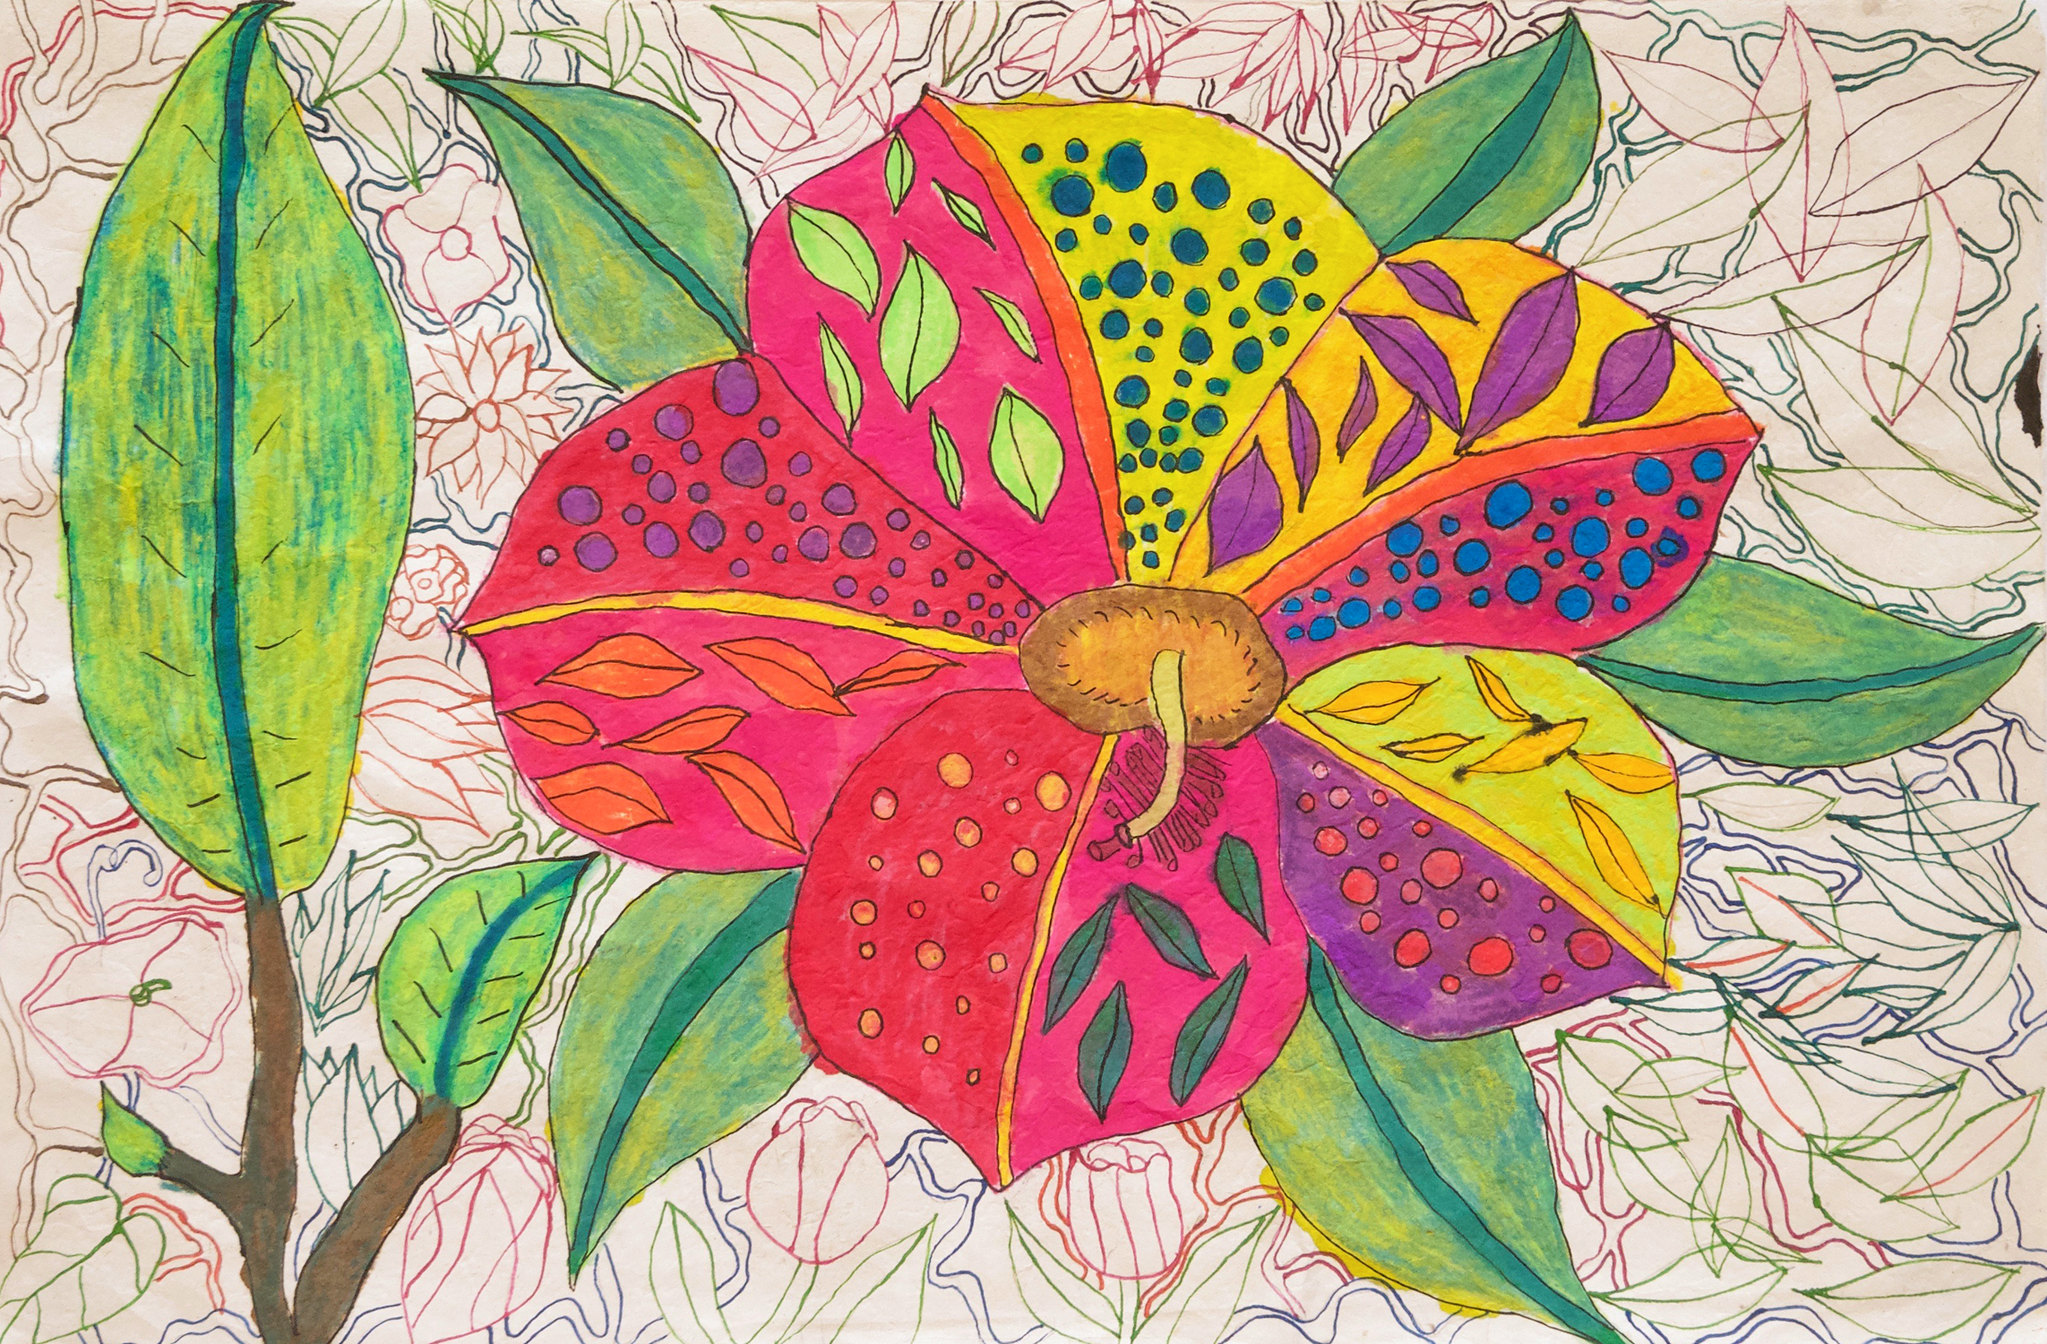 colorful flower and leaf shapes with leaf and polka dot patterning on the petals and leaves and background